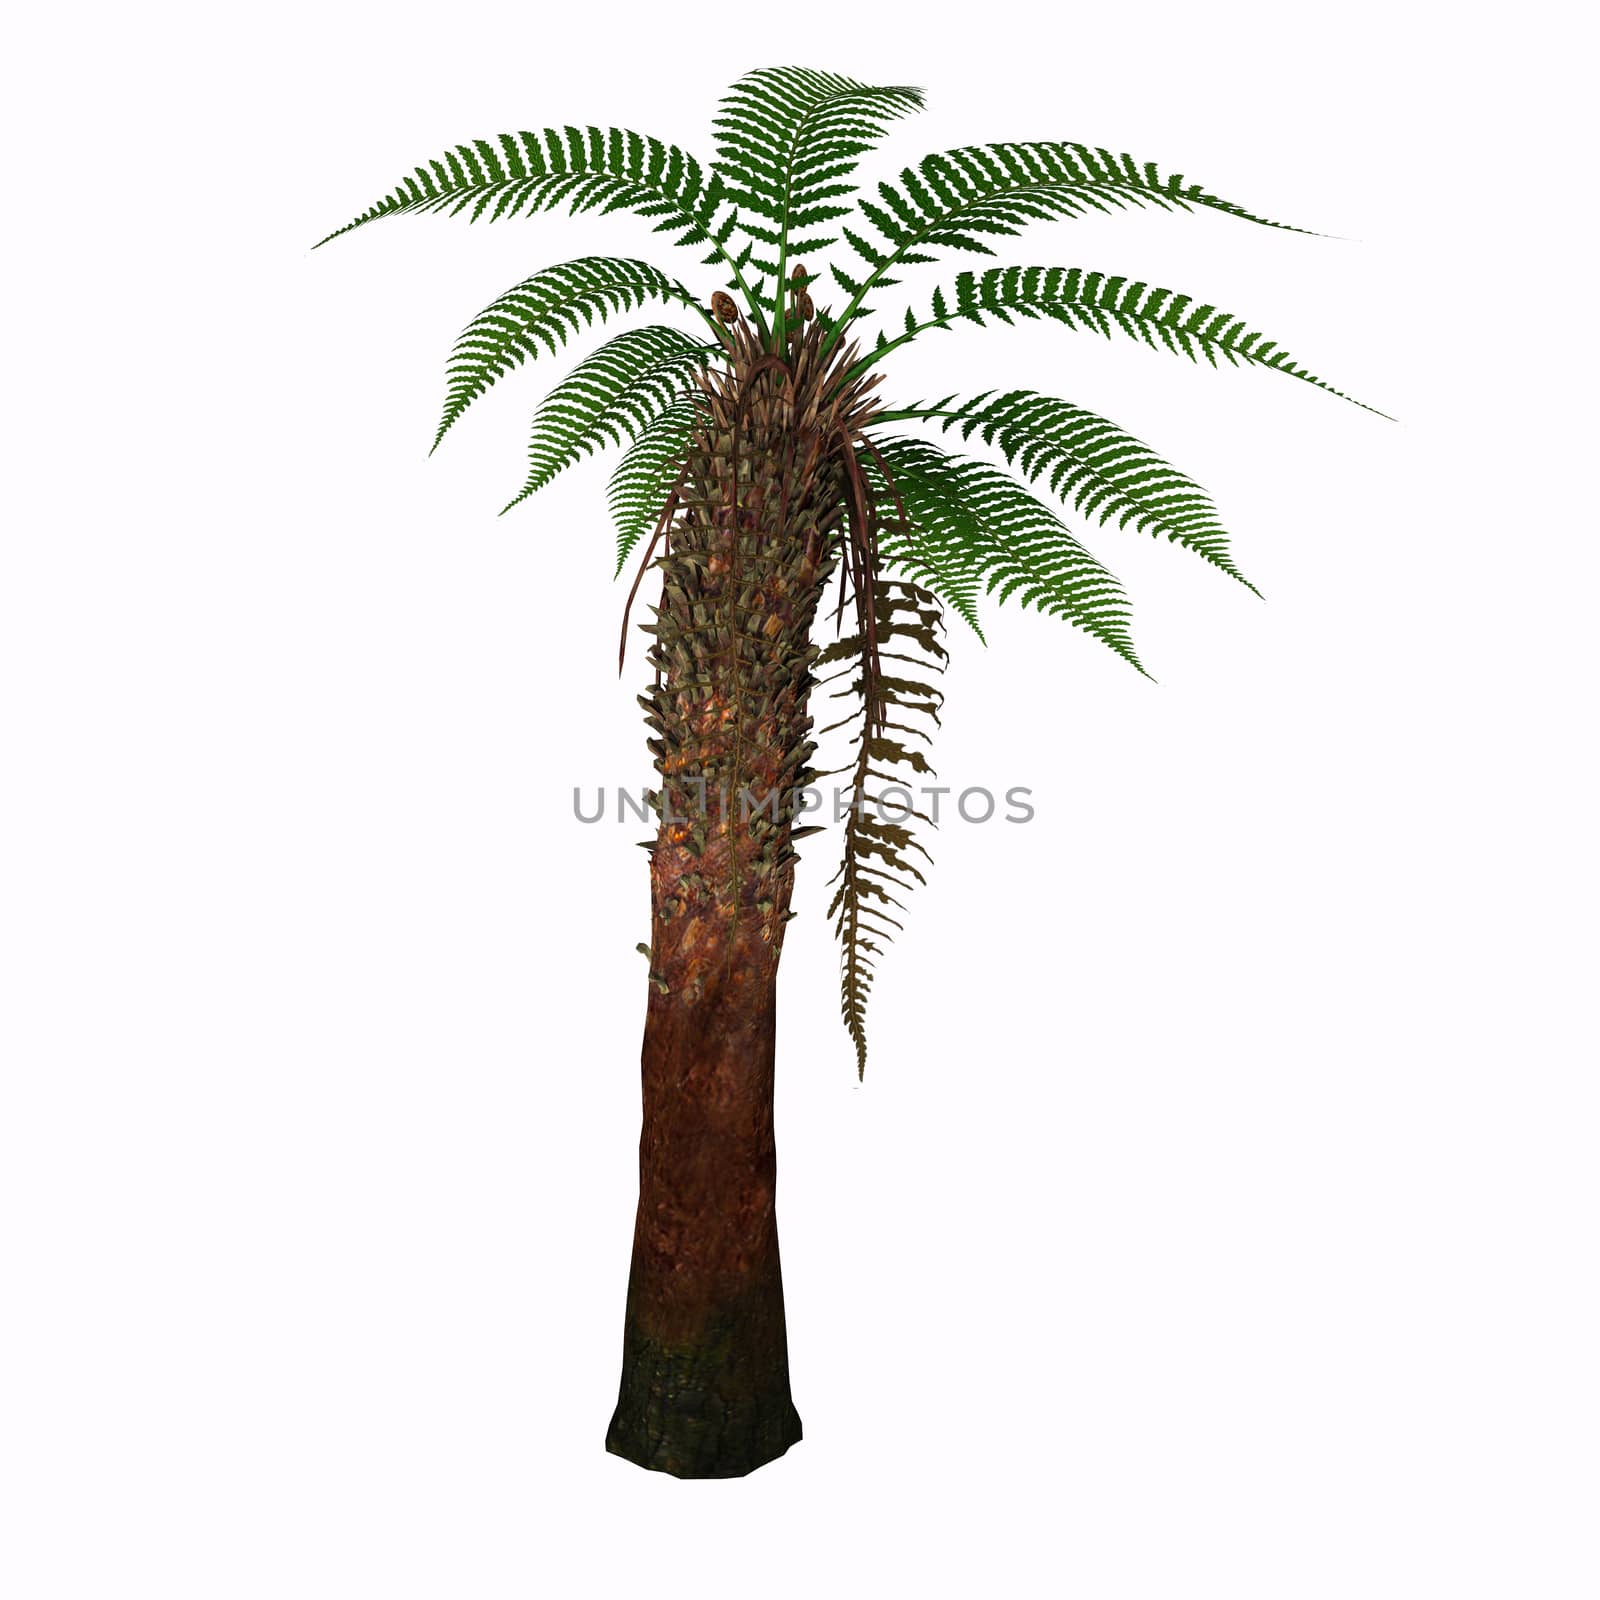 Dicksonia antarctica (Tasmanian Tree Fern) is a slow growing tree fern that in time will reach 15 feet tall with a possible 6-10' spread. 